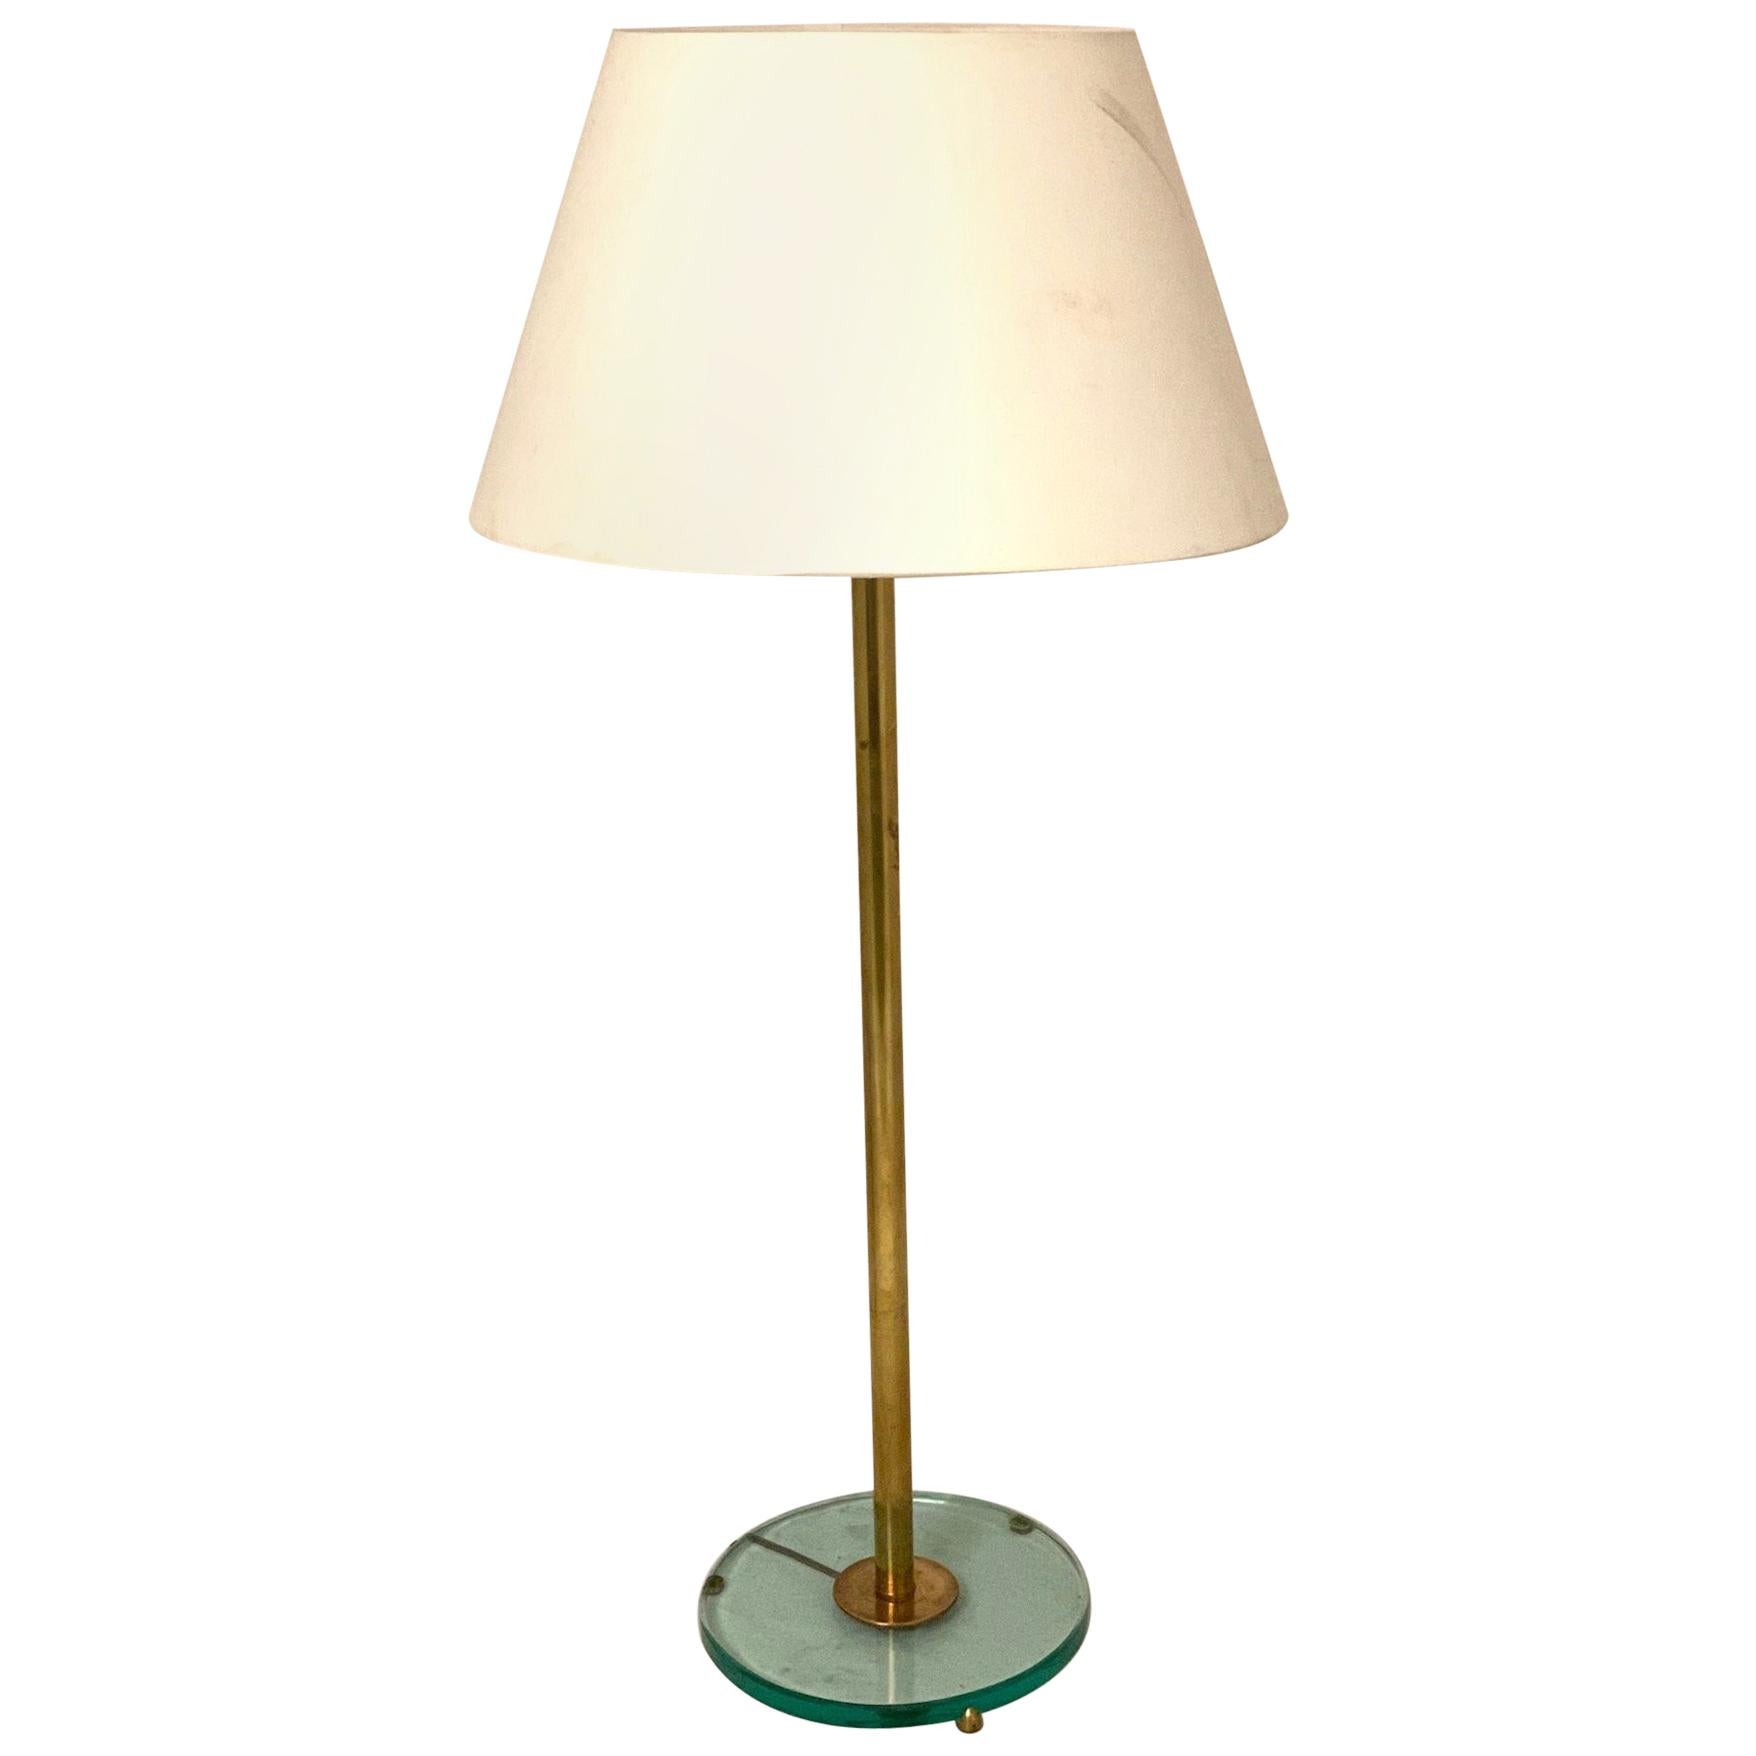 Italian 1940s Table Lamp in the Style of the Fontana Arte